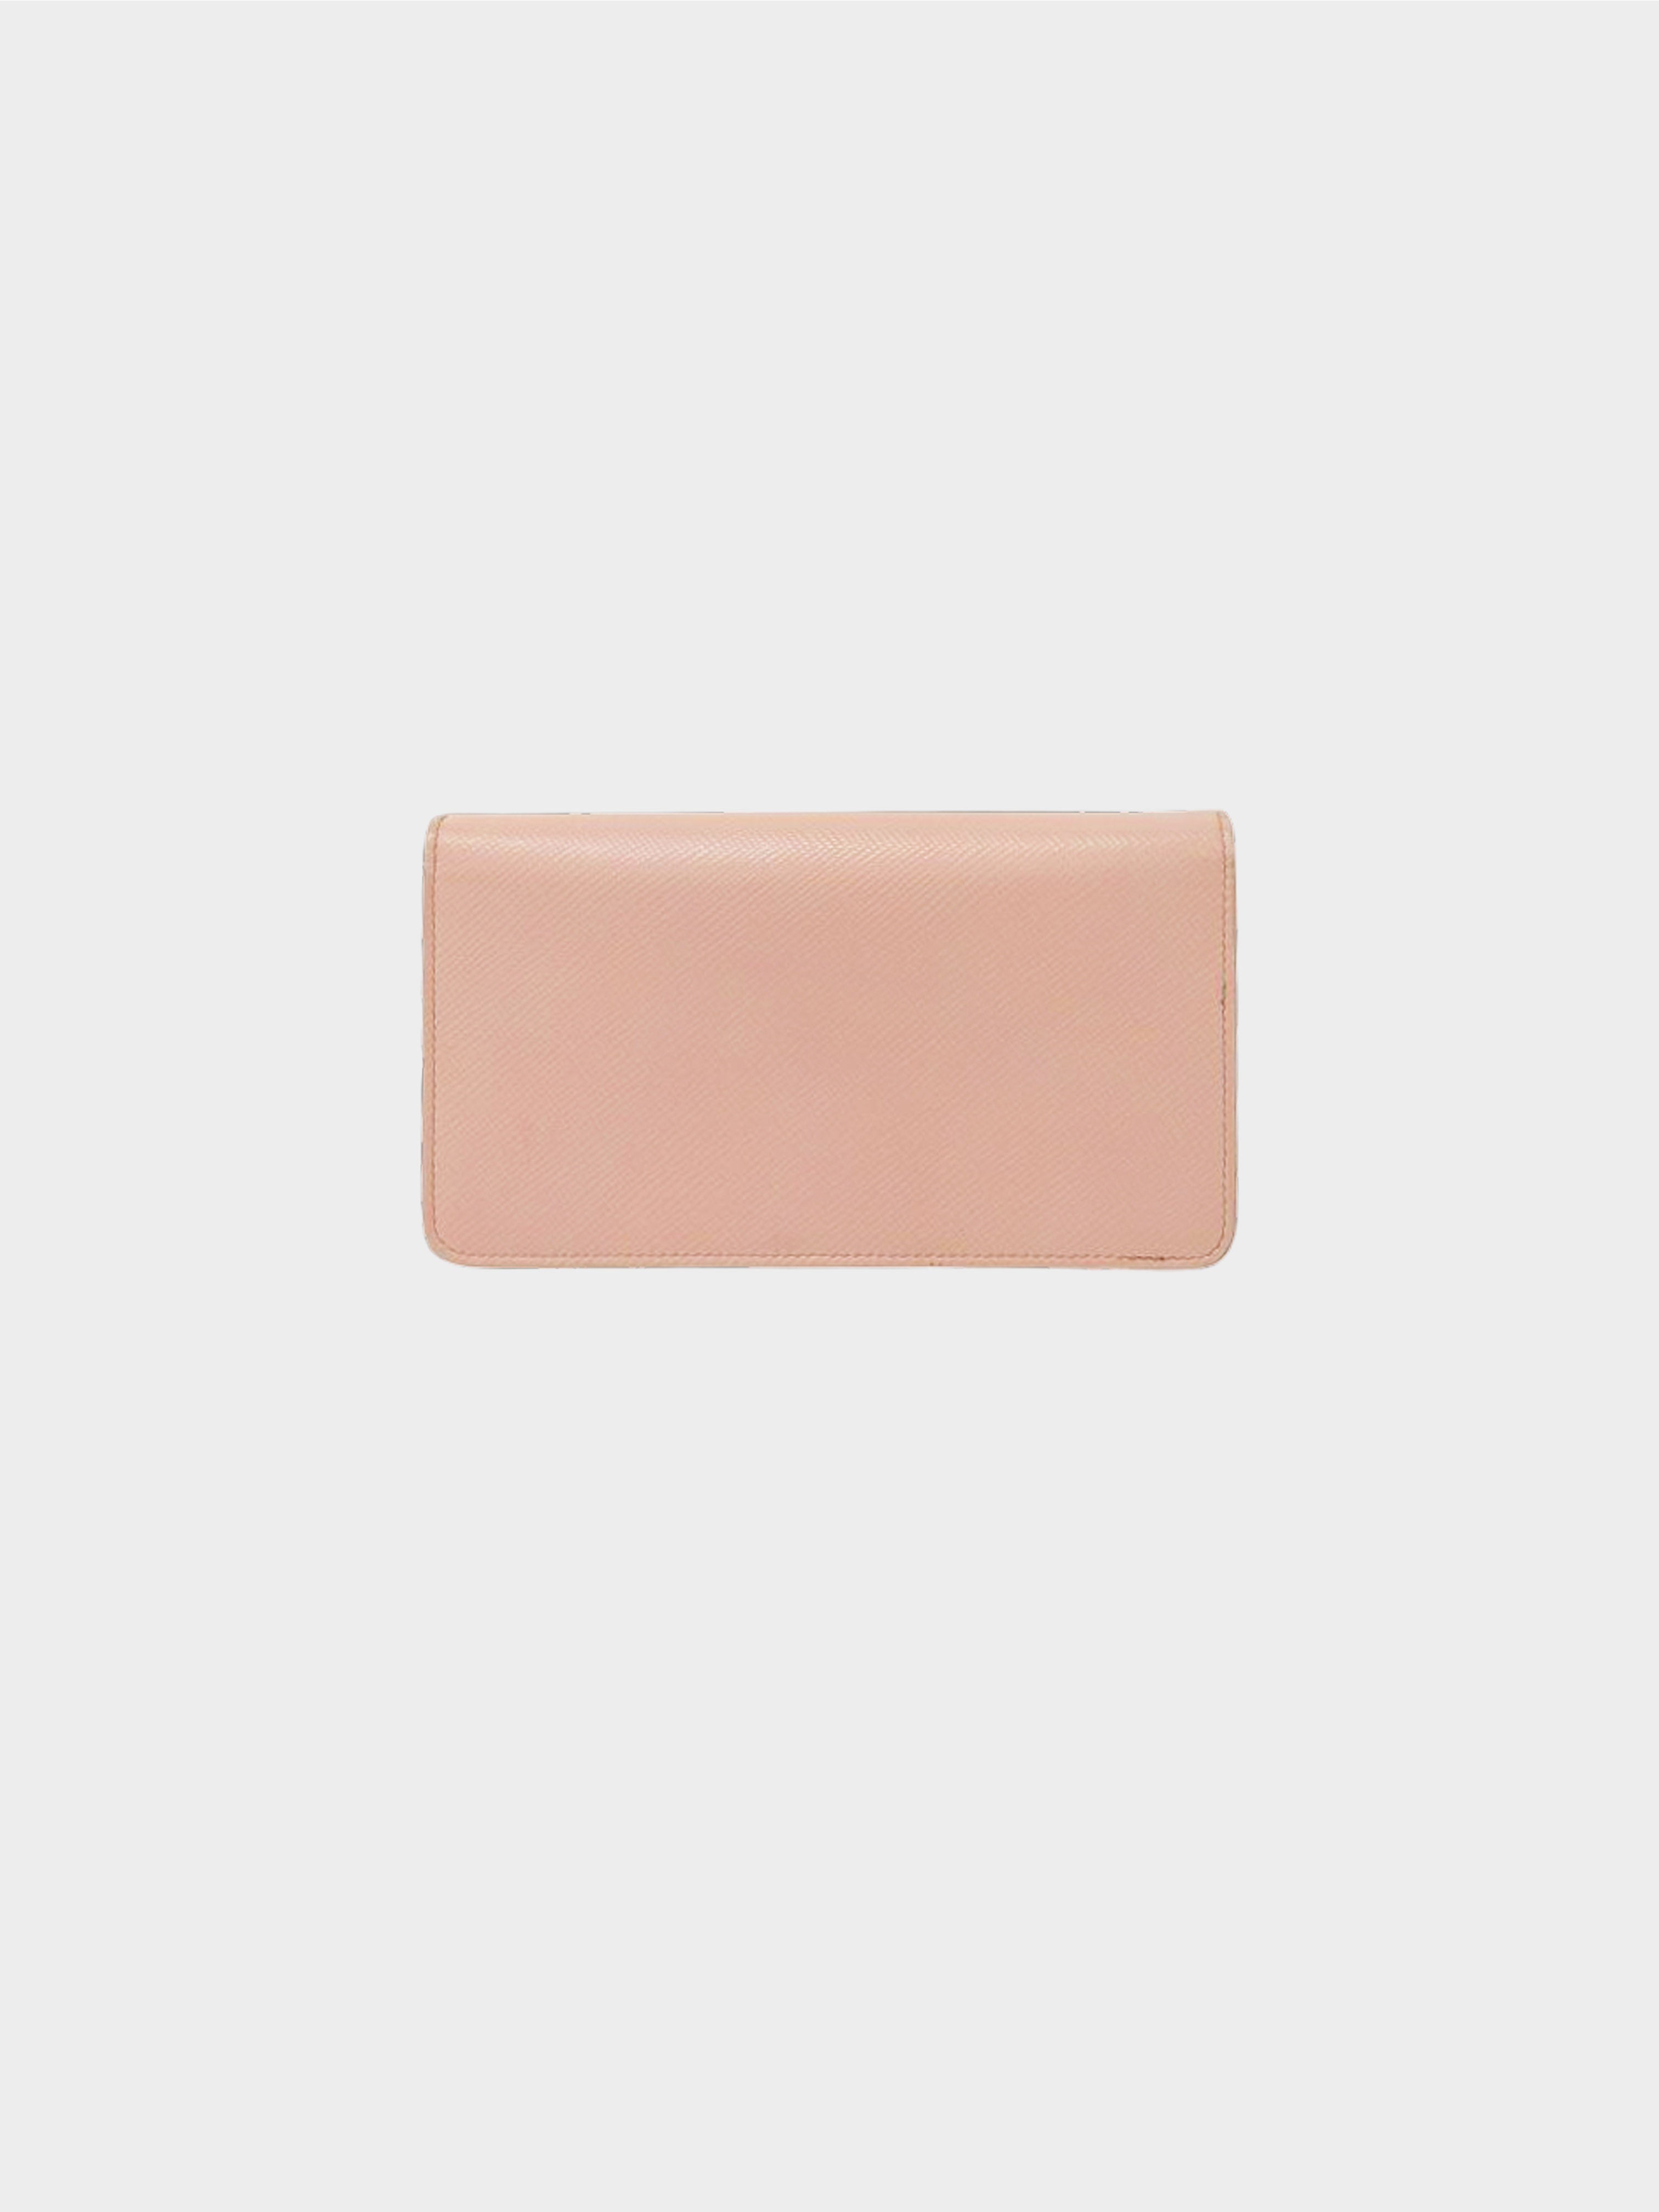 Prada 2010s Baby Pink Saffiano Leather Wallet on Chain